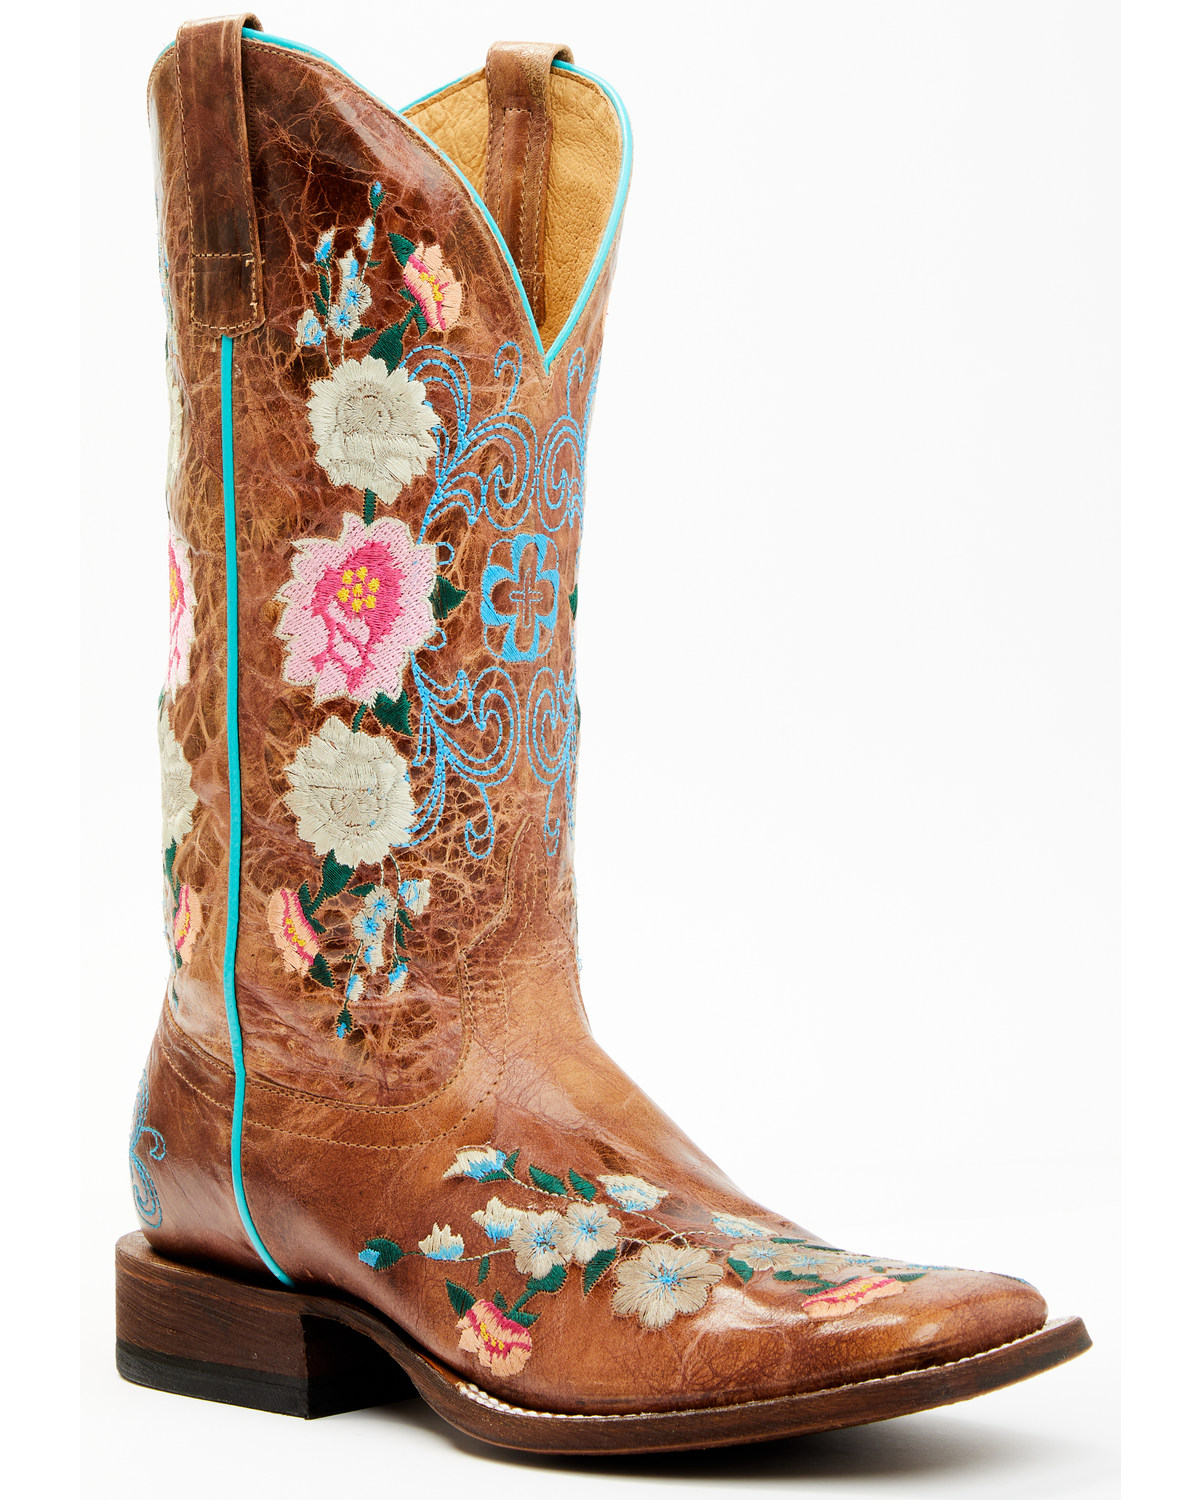 Macie Bean Rose Garden Cowgirl Boots - Square Toe | Boot Barn